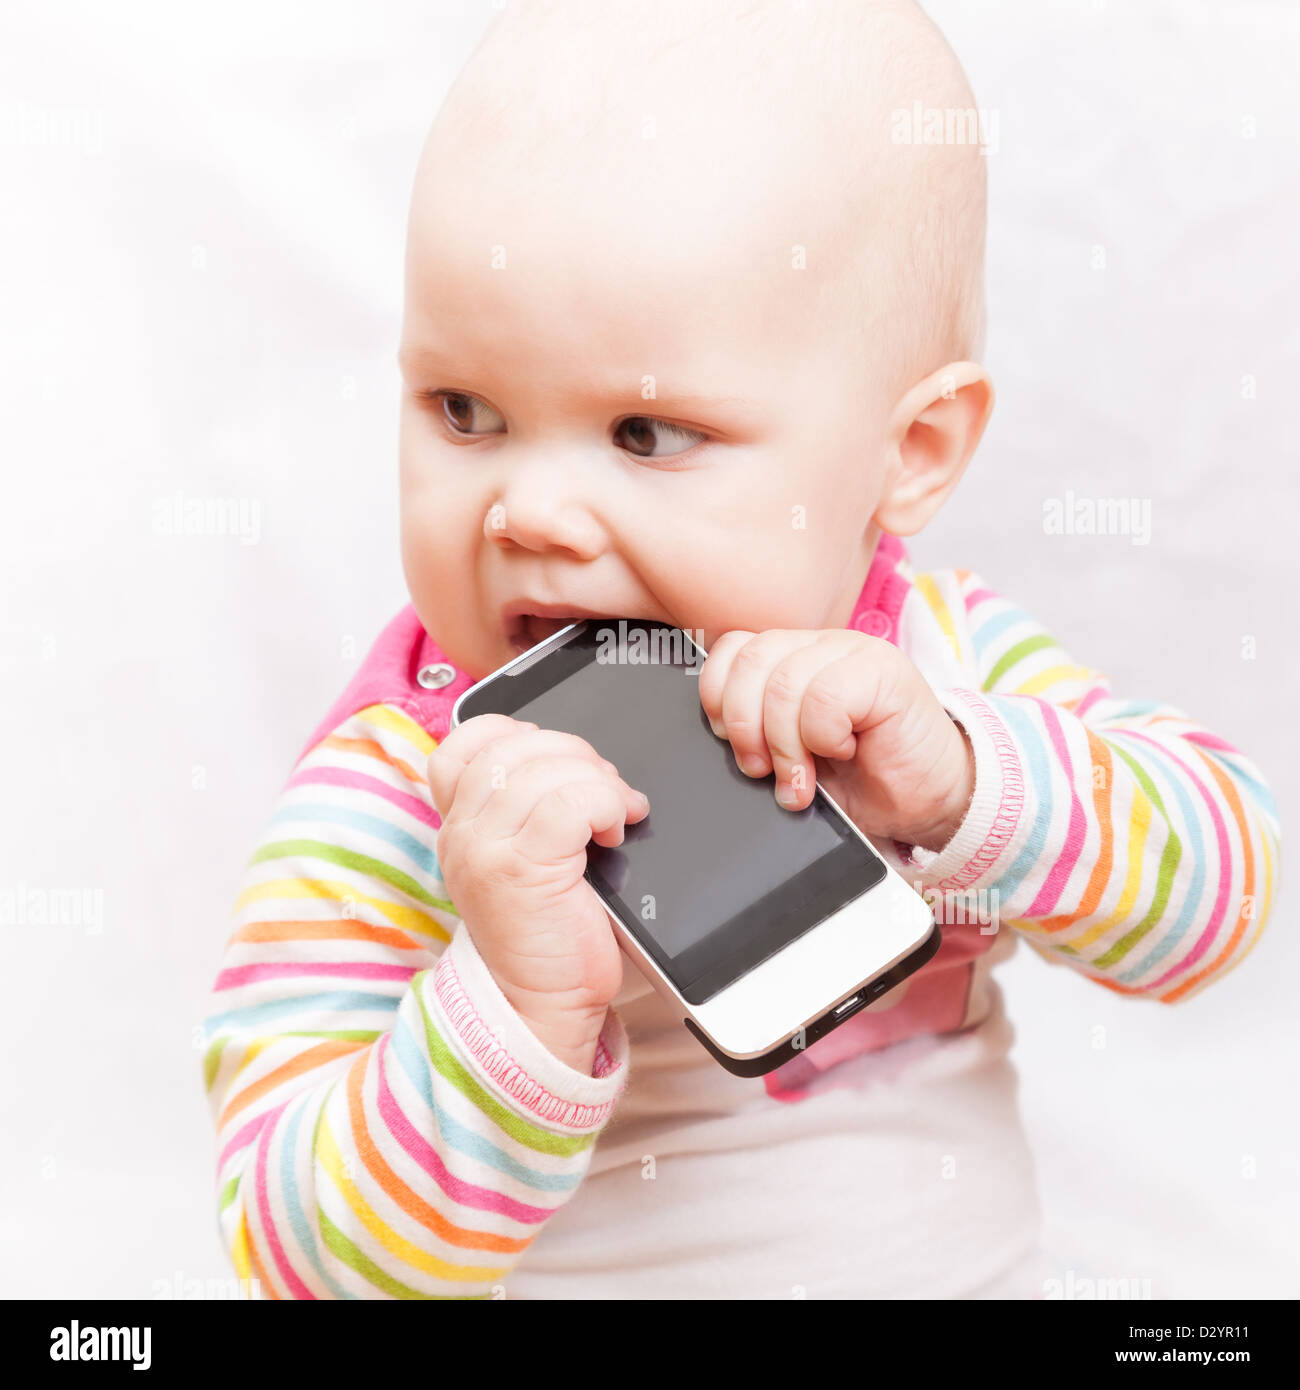 little baby chews on a mobile phone in colorful striped clothing Stock Photo